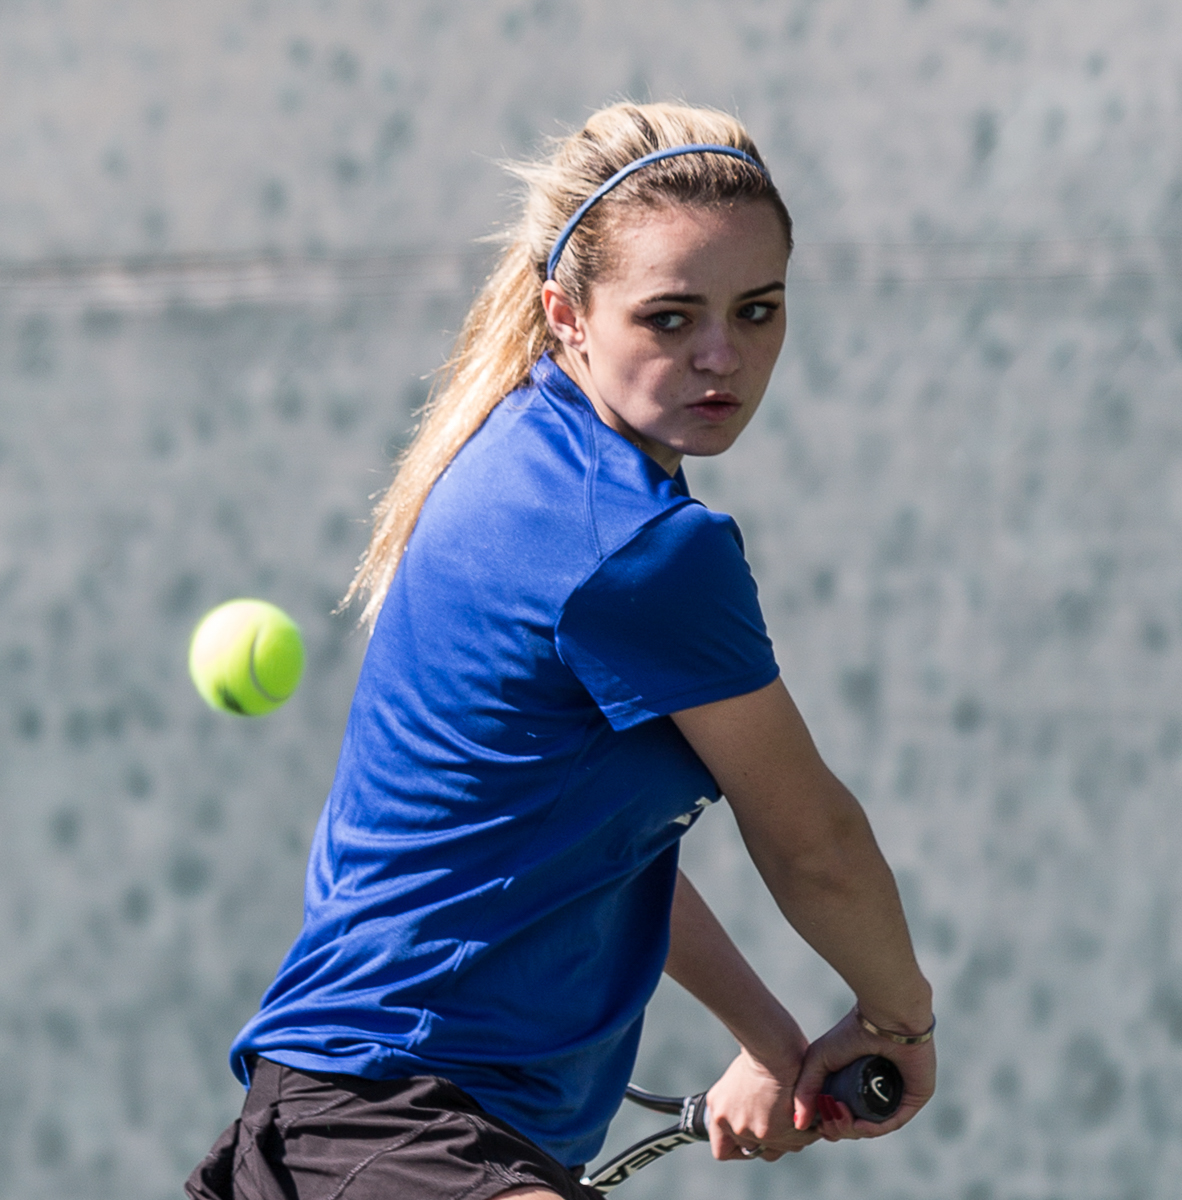  Santa Monica College Corsair sophomore Abby Mullins (#1, singles) prepares to hit a powerful backhand shot at her Ventura College opponent during her 2 – 0 (6-3, 6-2) set victory, which was part of the Corsairs 3 – 6 loss against the Ventura College